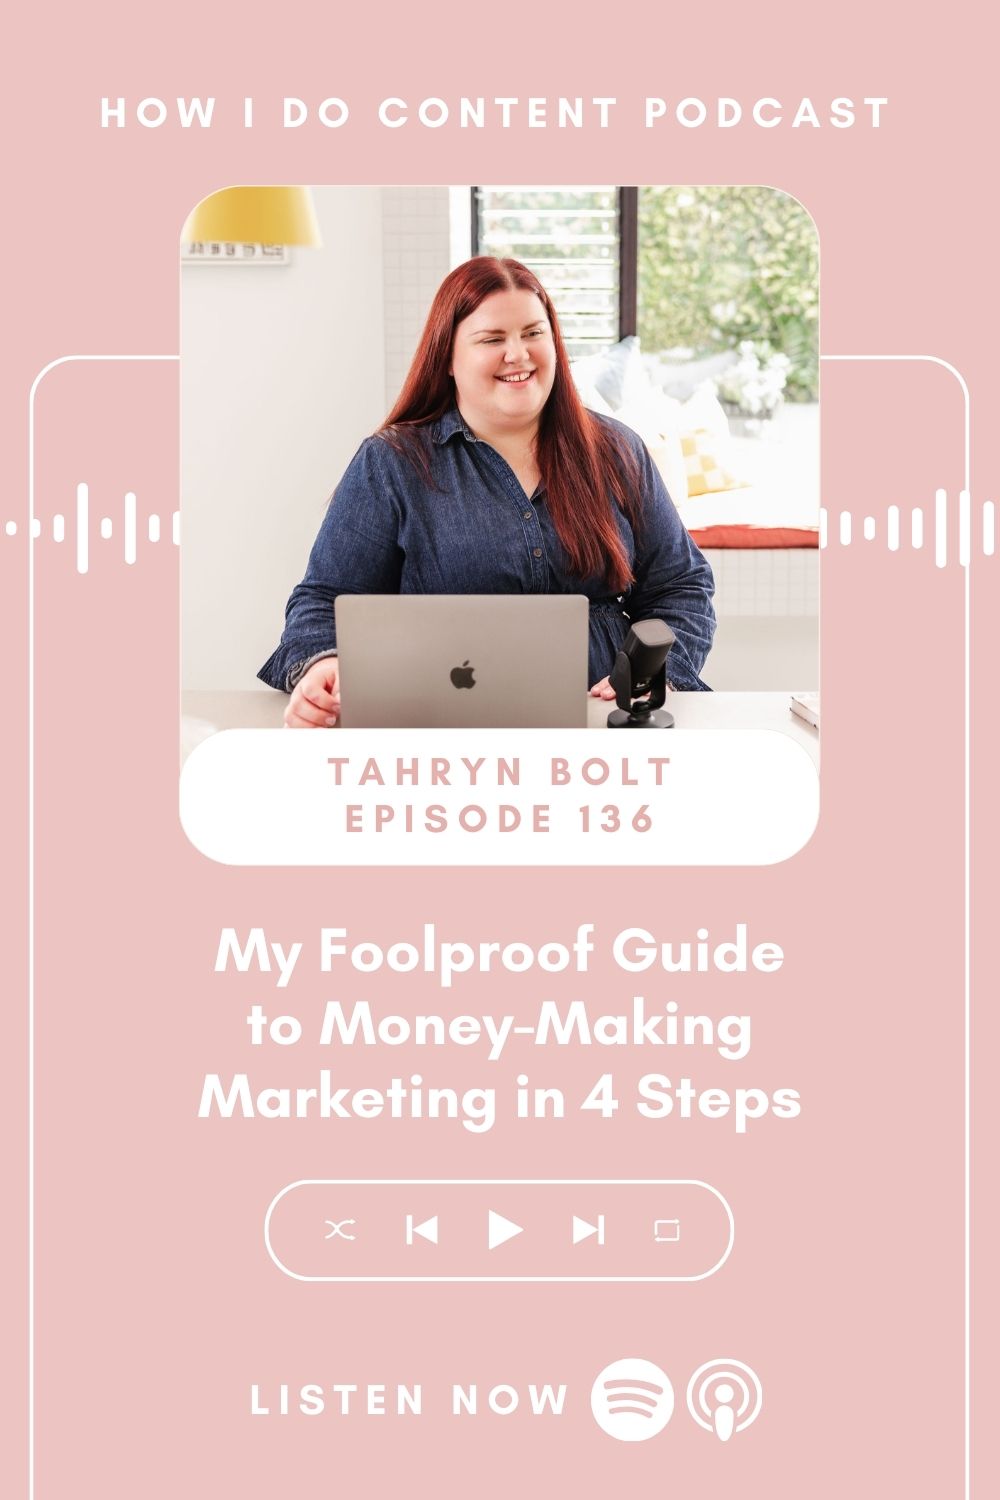 My Foolproof Guide to Money-Making Marketing in 4 Steps